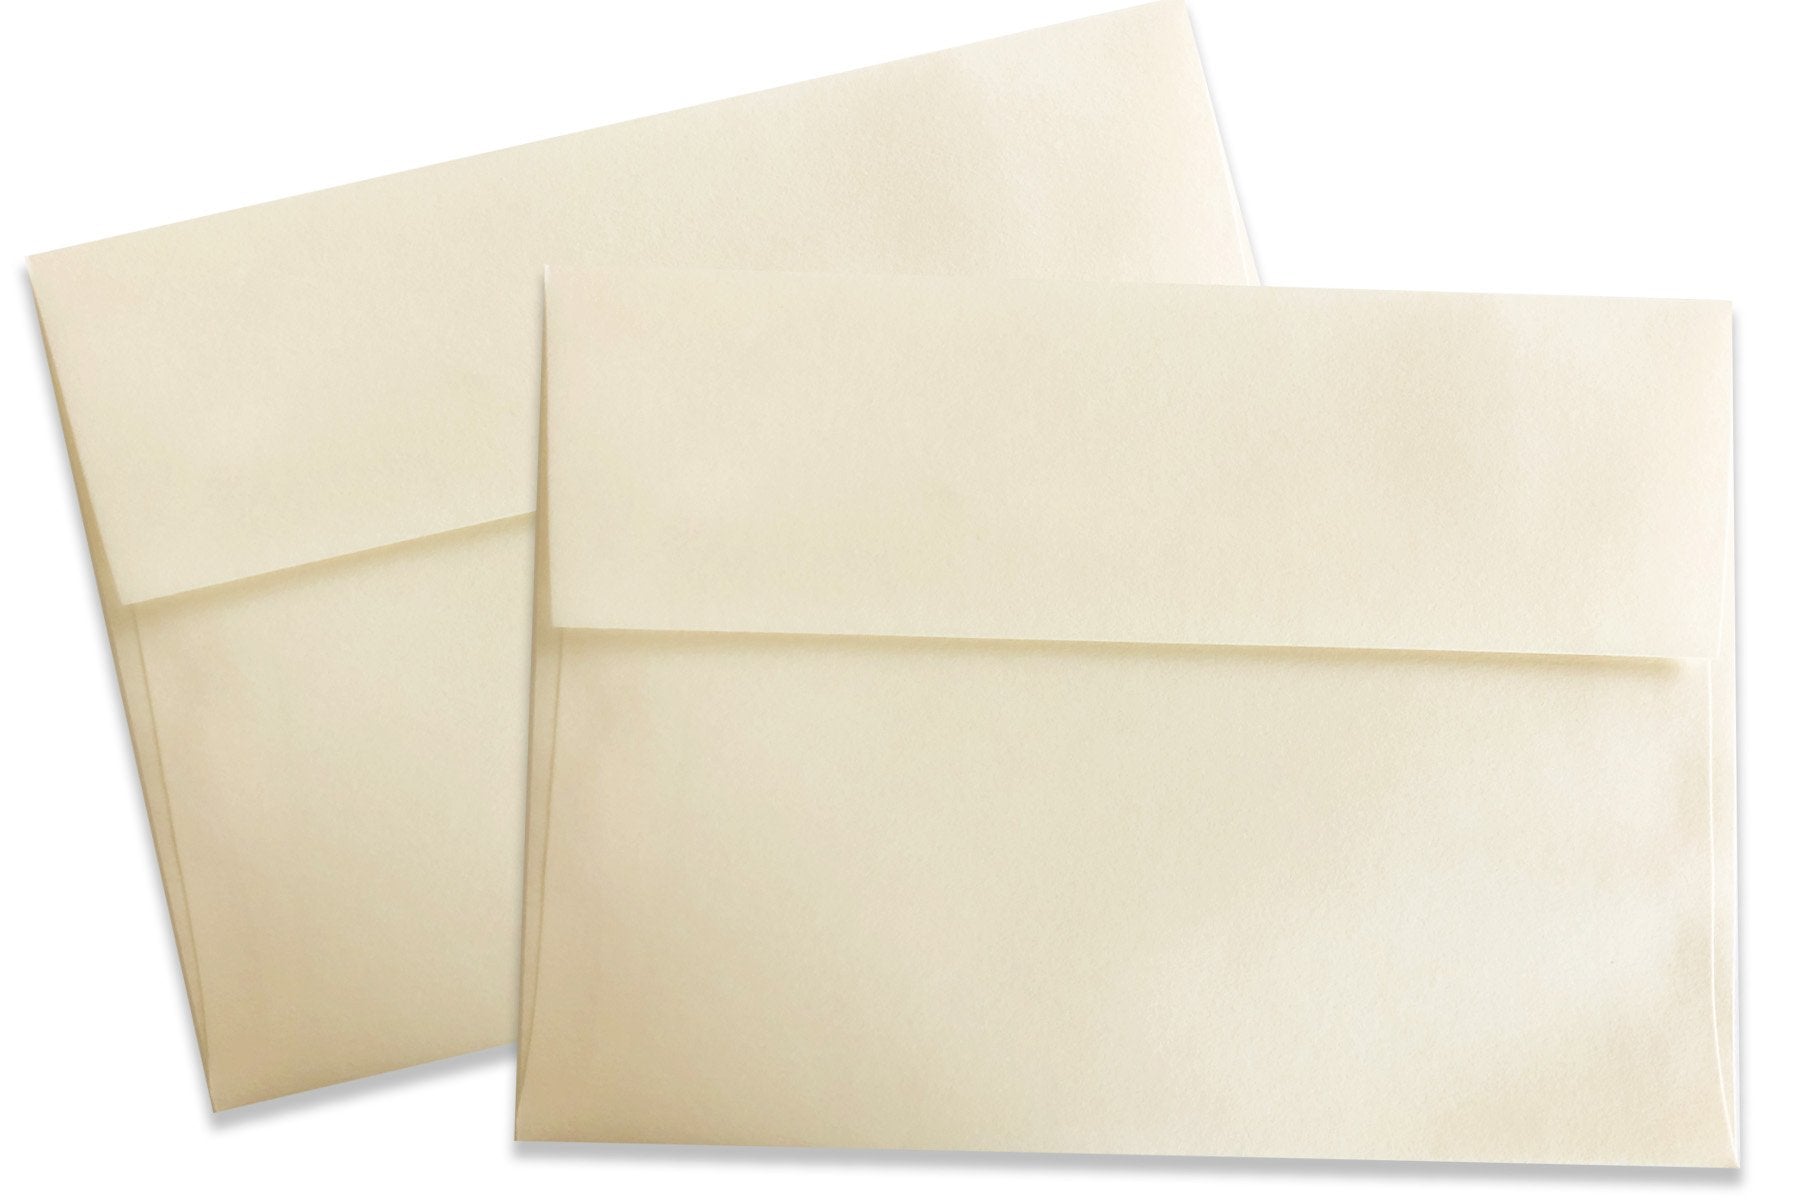 50 Pack Cards and Envelopes, 5x7 Inches for Invitations, Brown Kraft Paper